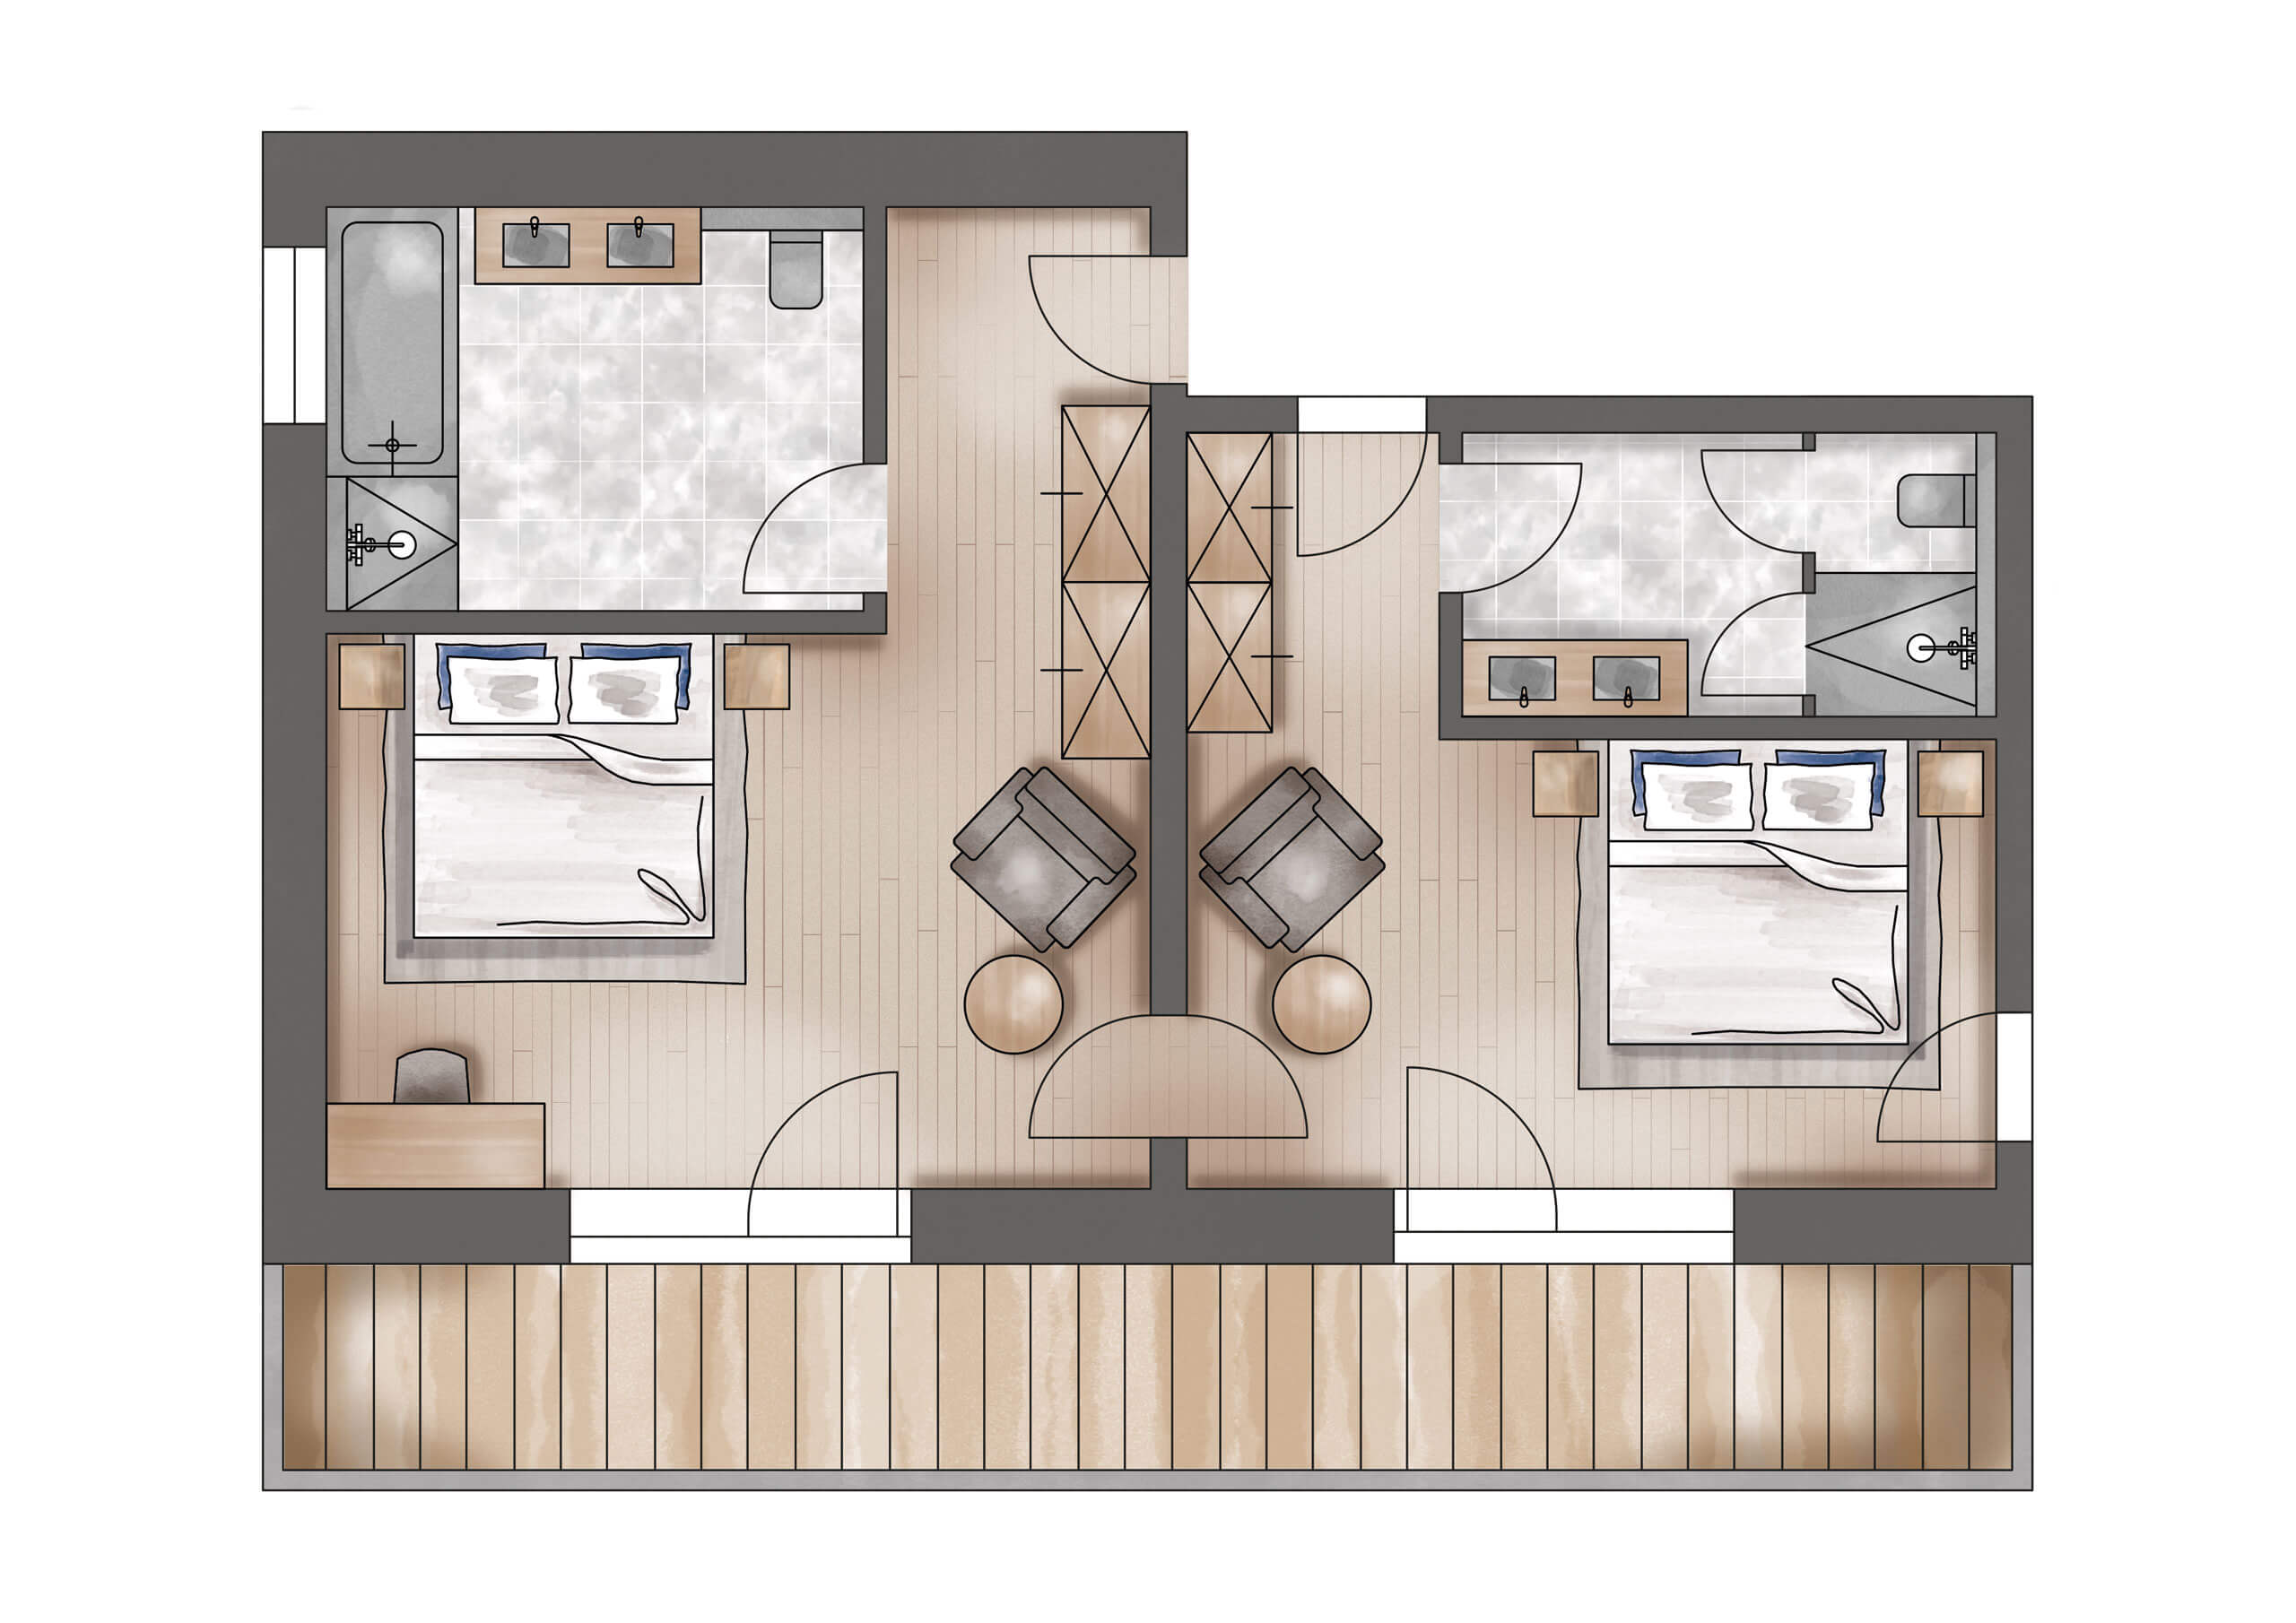 A floor plan of a two-bedroom apartment with a kitchen appliance